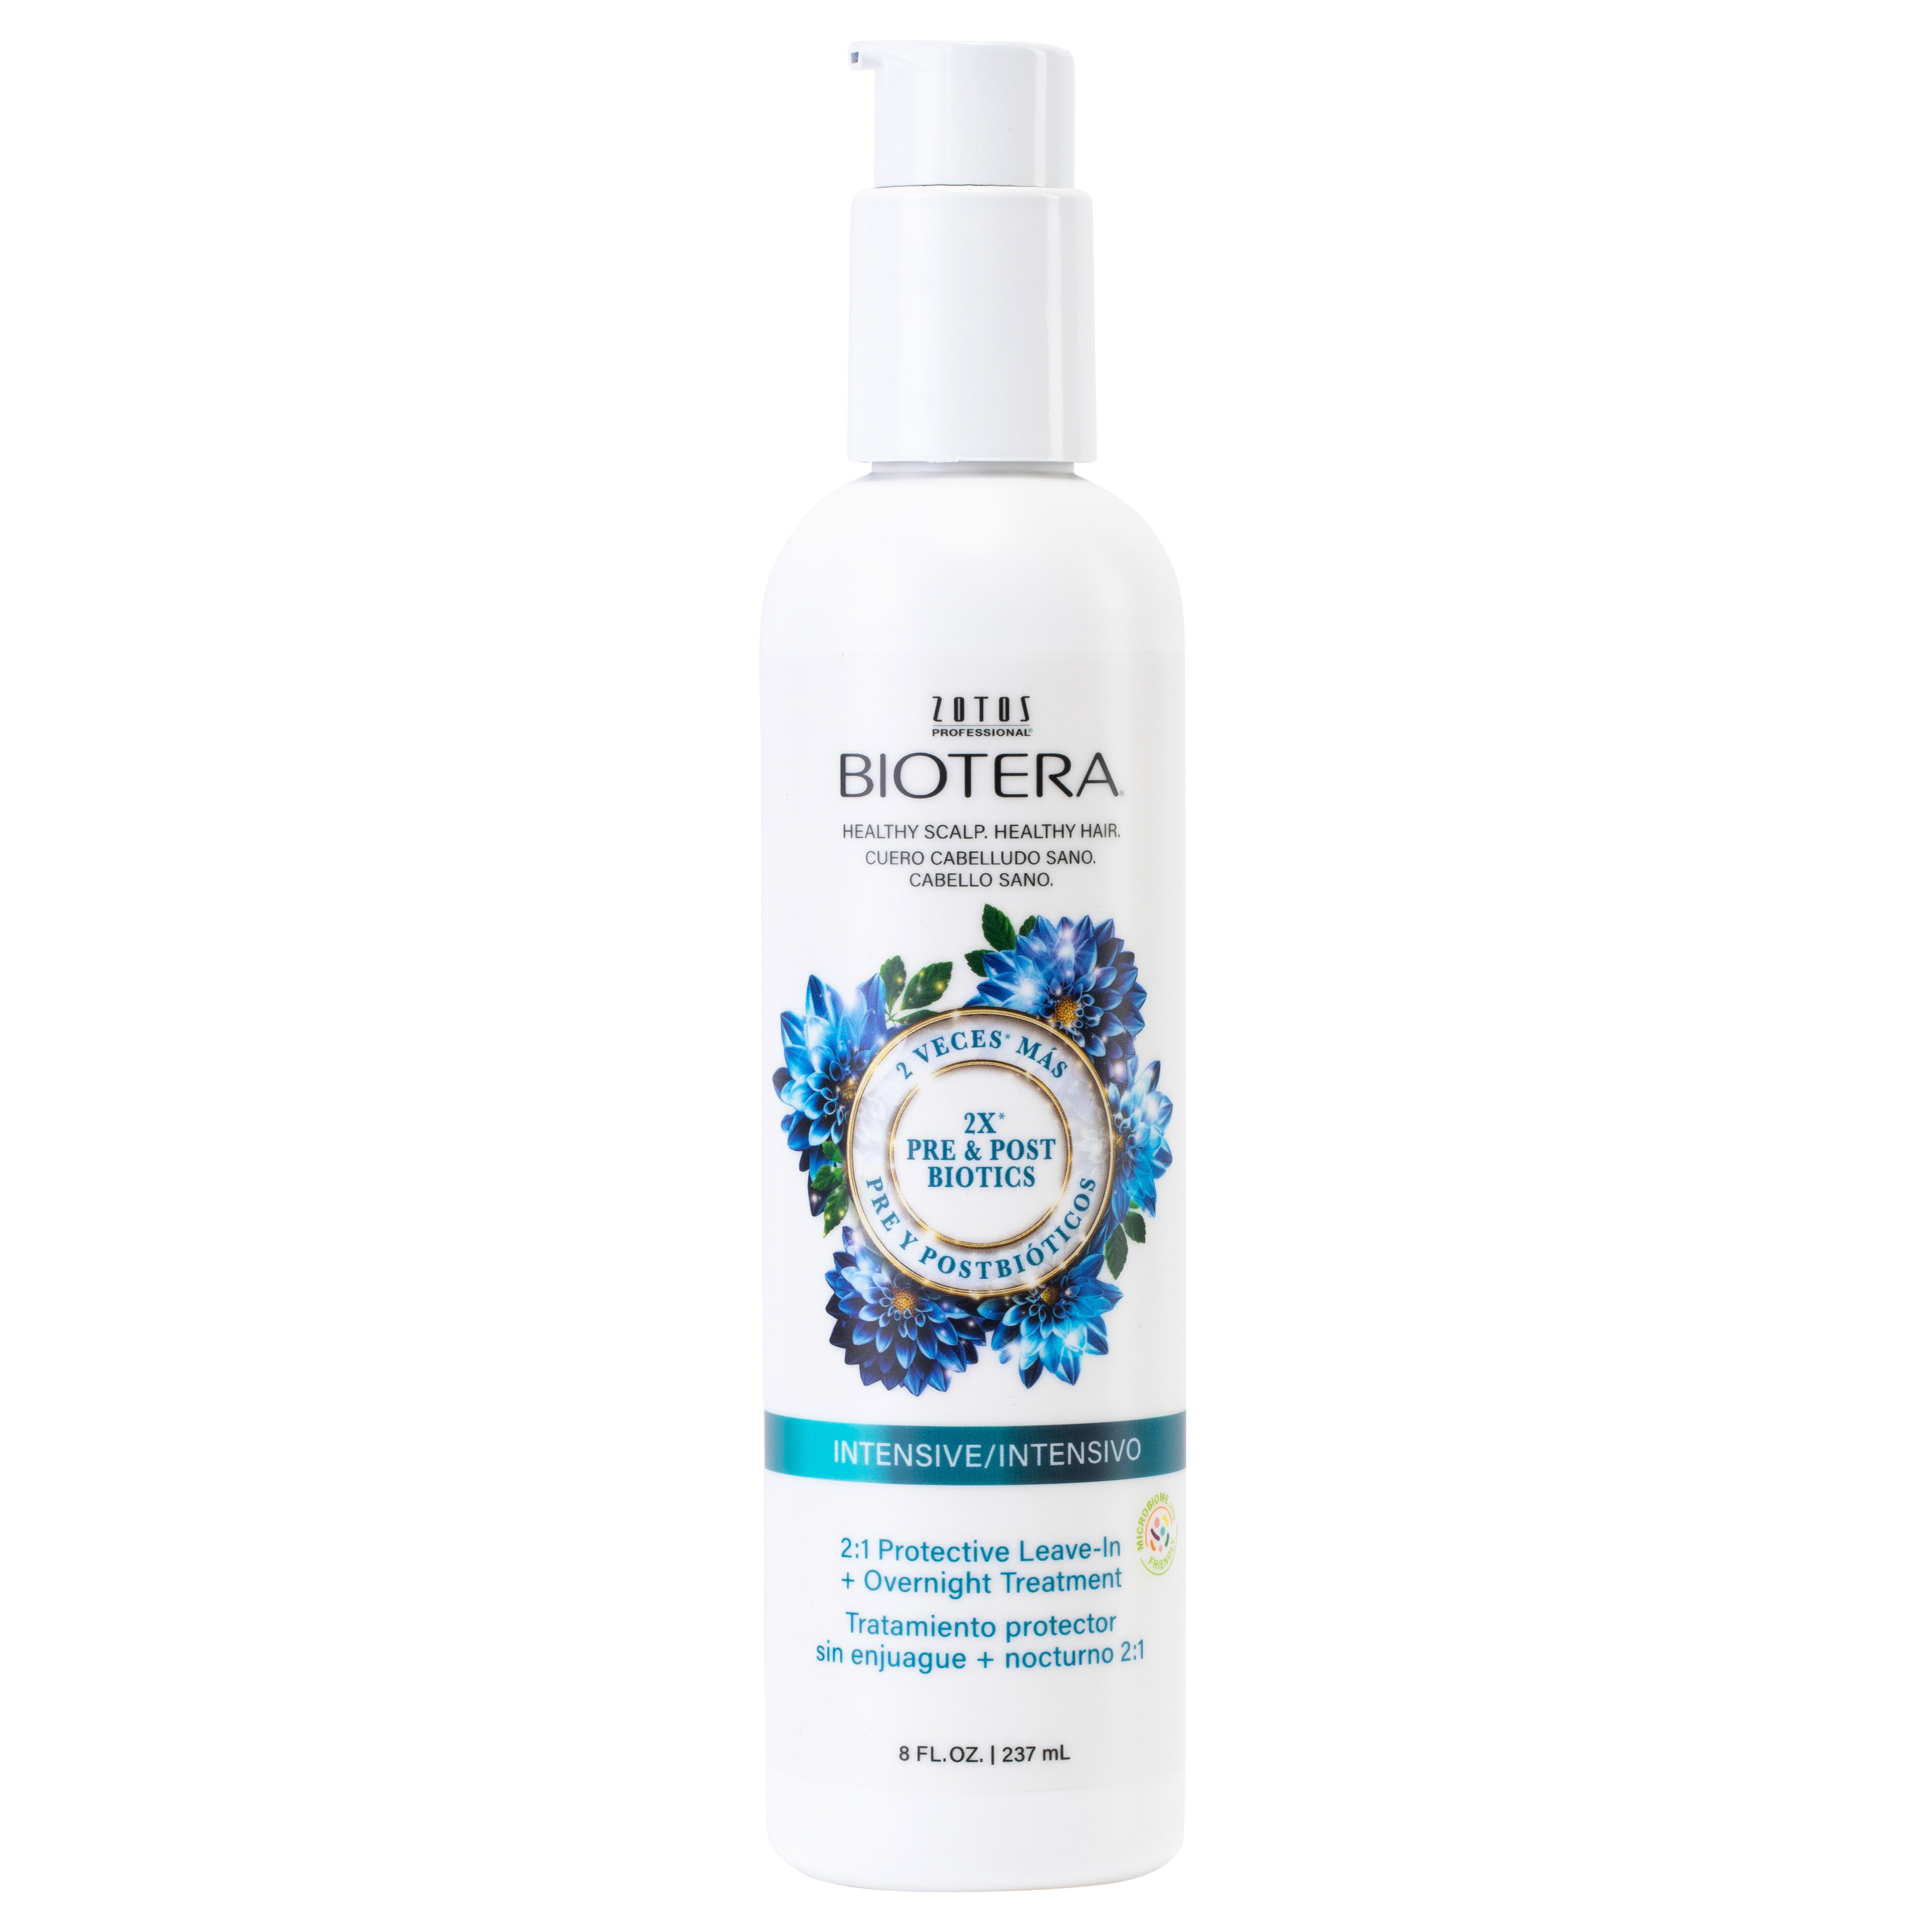 Biotera Intensives 2:1 Protective Leave-In and Overnight Treatment bottle. 